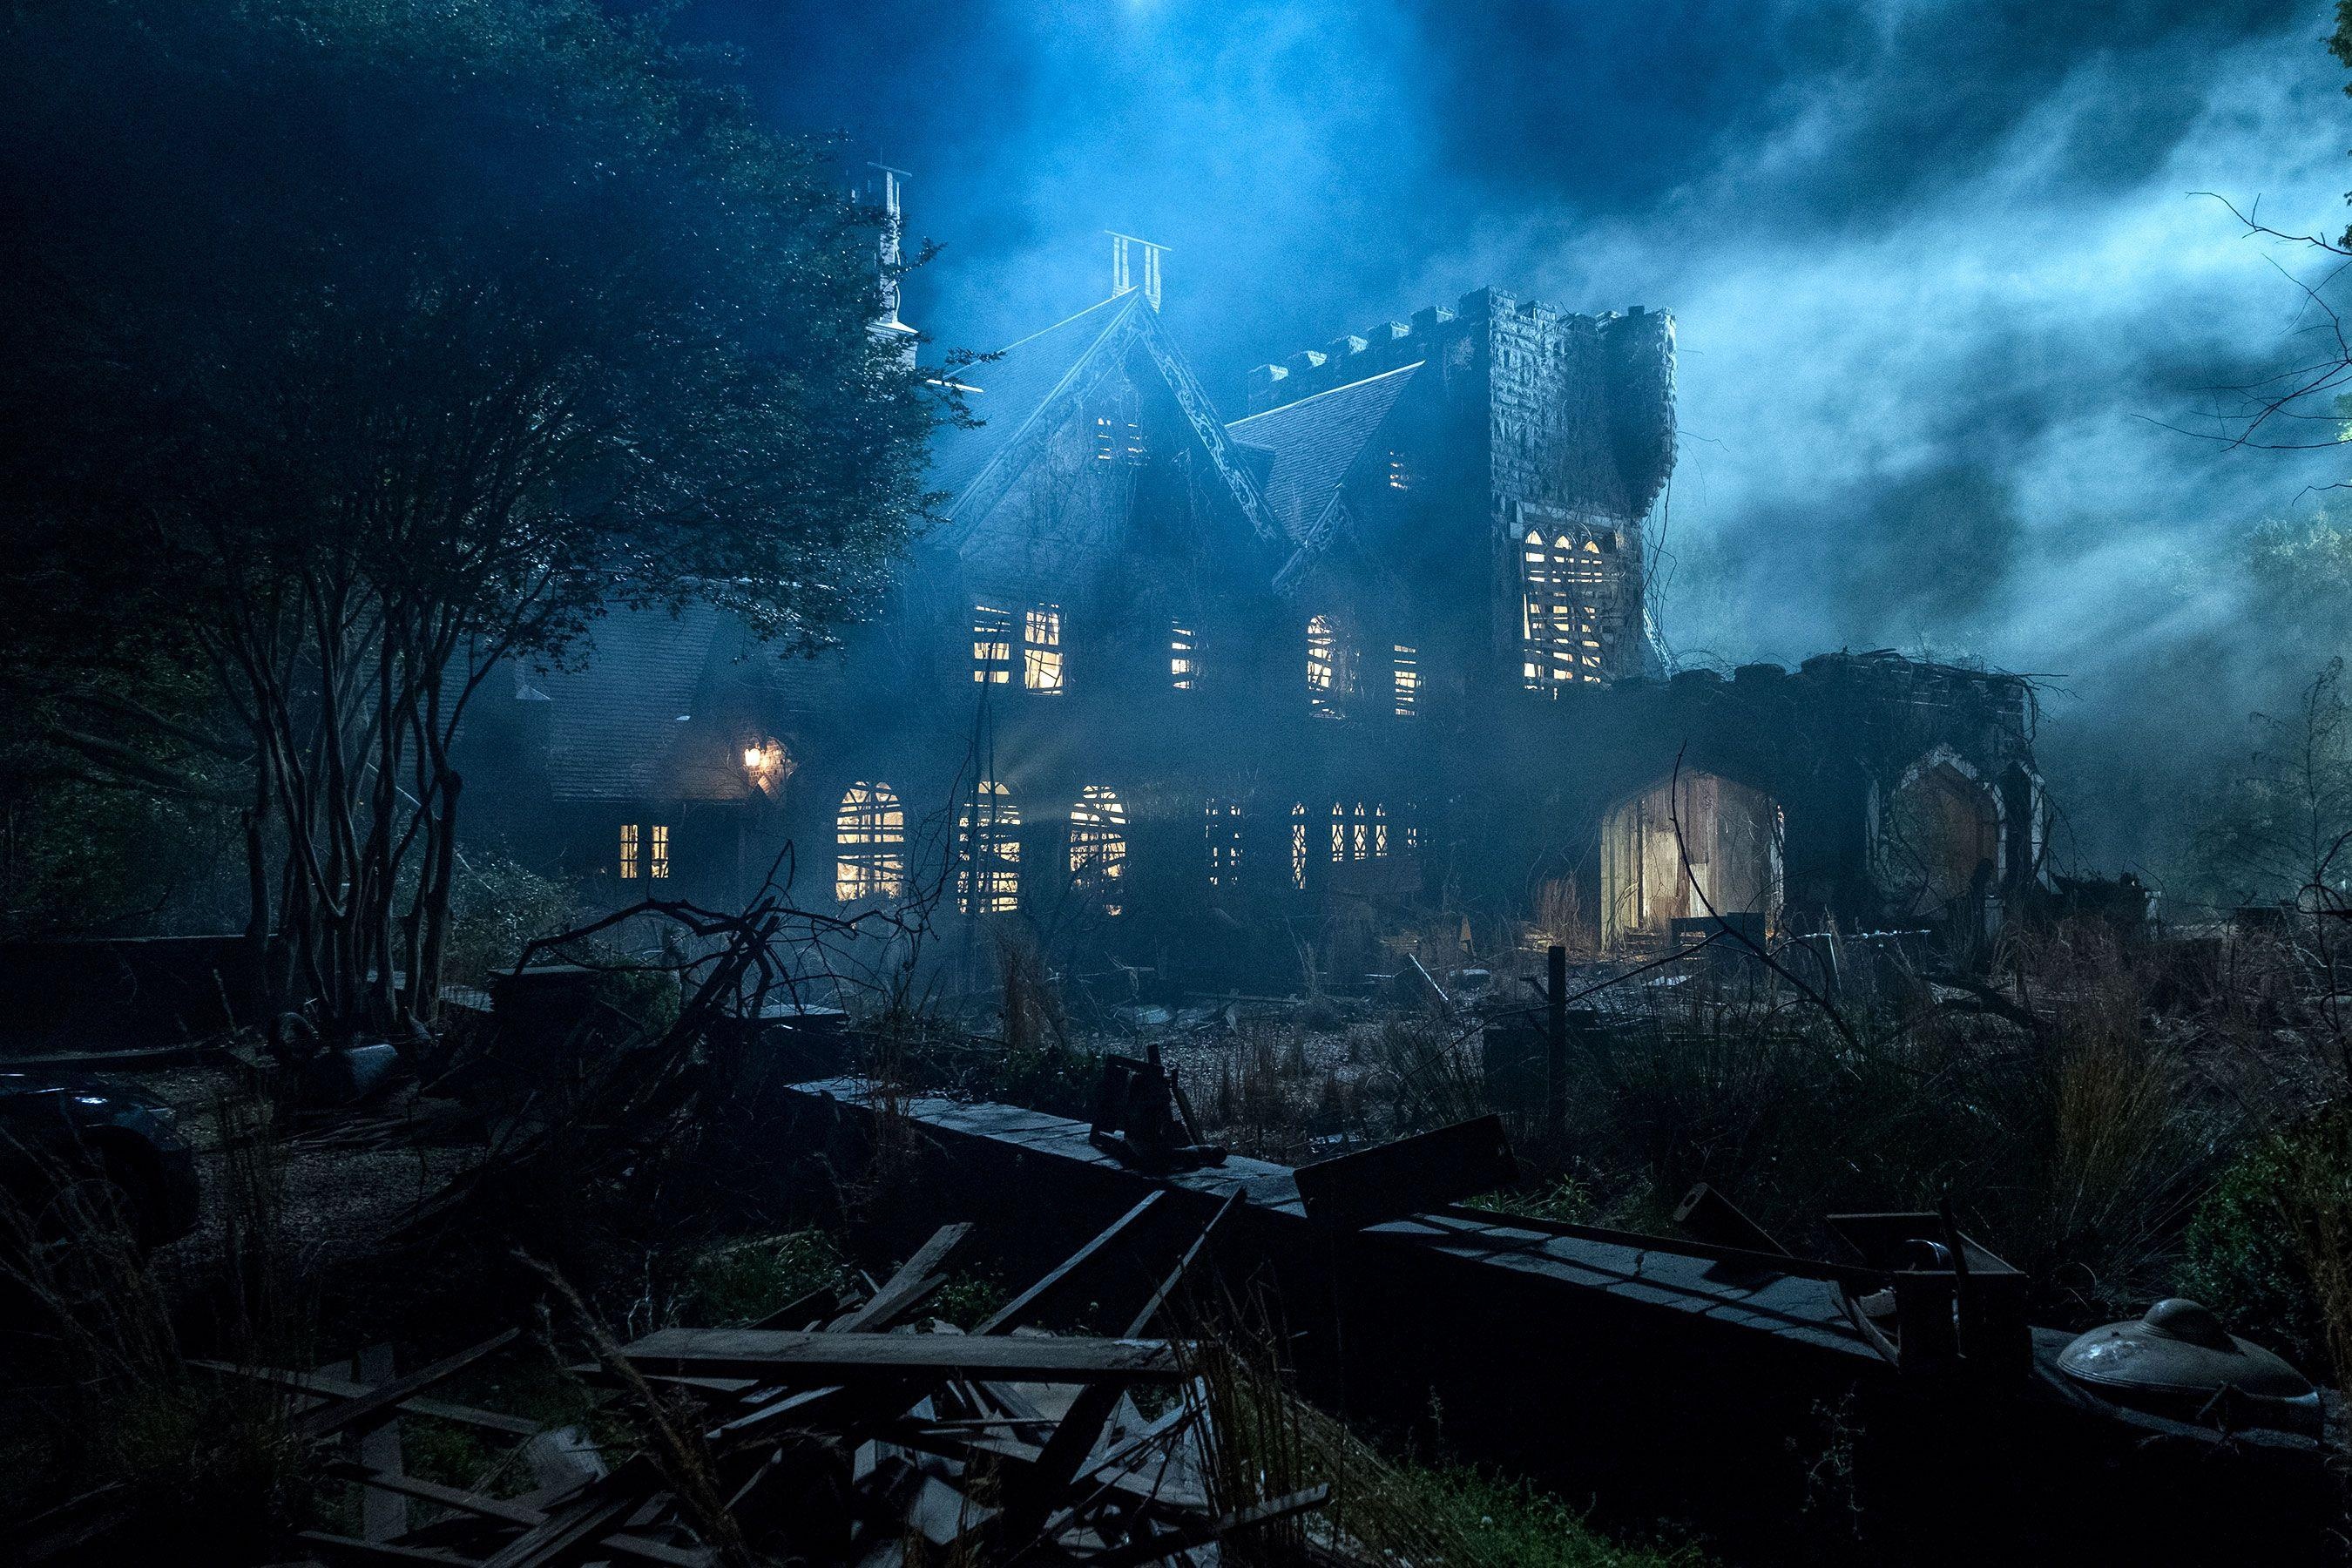 The Haunting of Hill House, Chilling series, Haunted mansion, Mysterious background, 2700x1800 HD Desktop